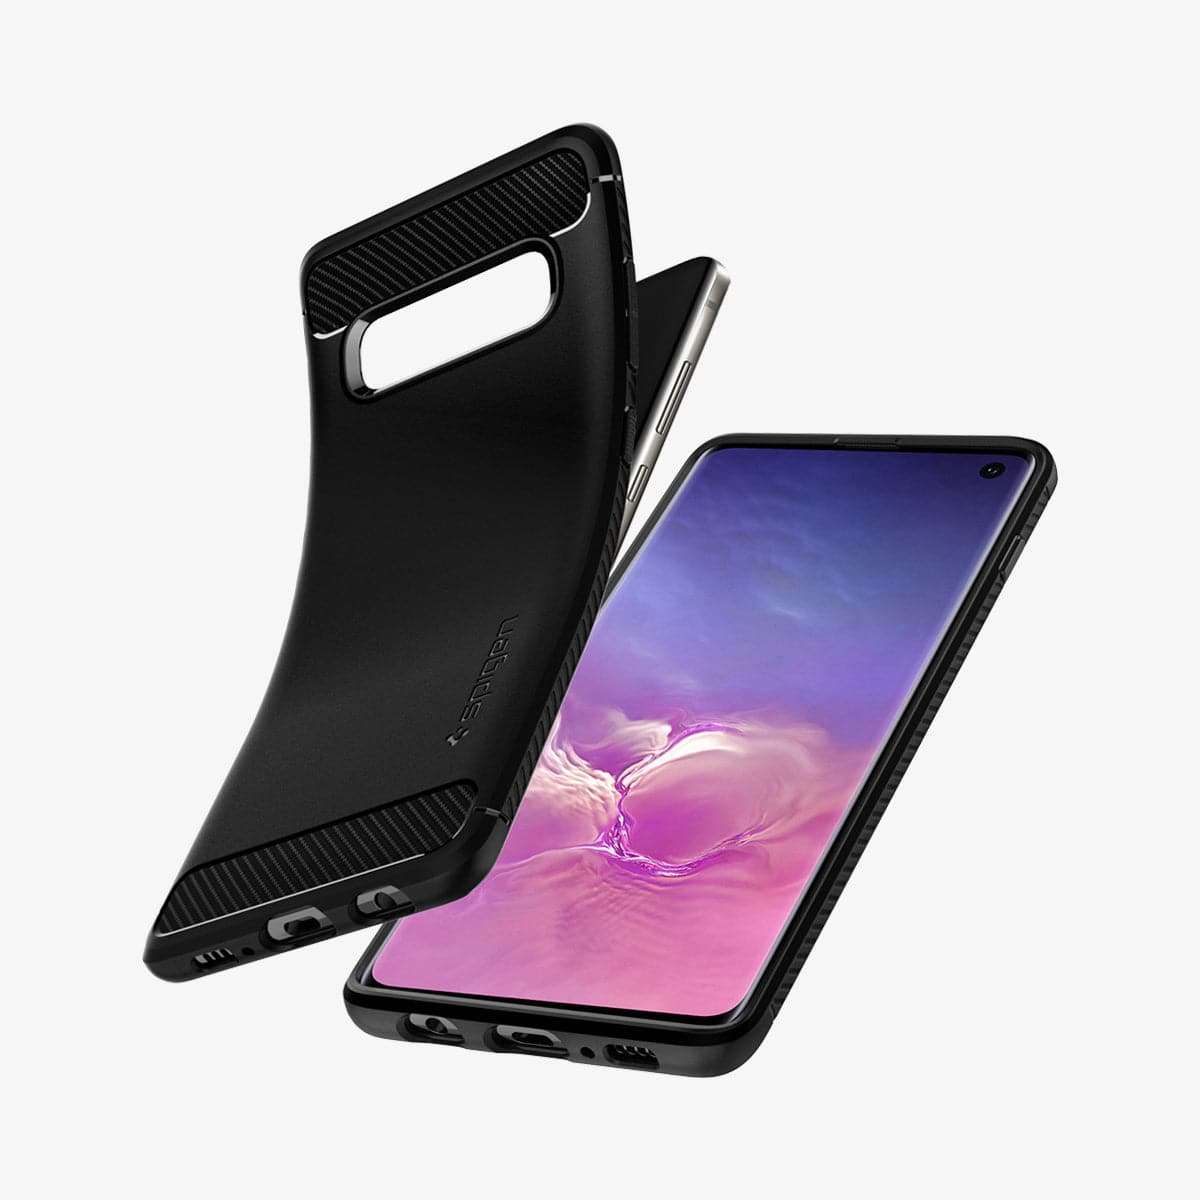 605CS25800 - Galaxy S10 Rugged Armor Case in black showing the back, front and sides with case bending away from the device